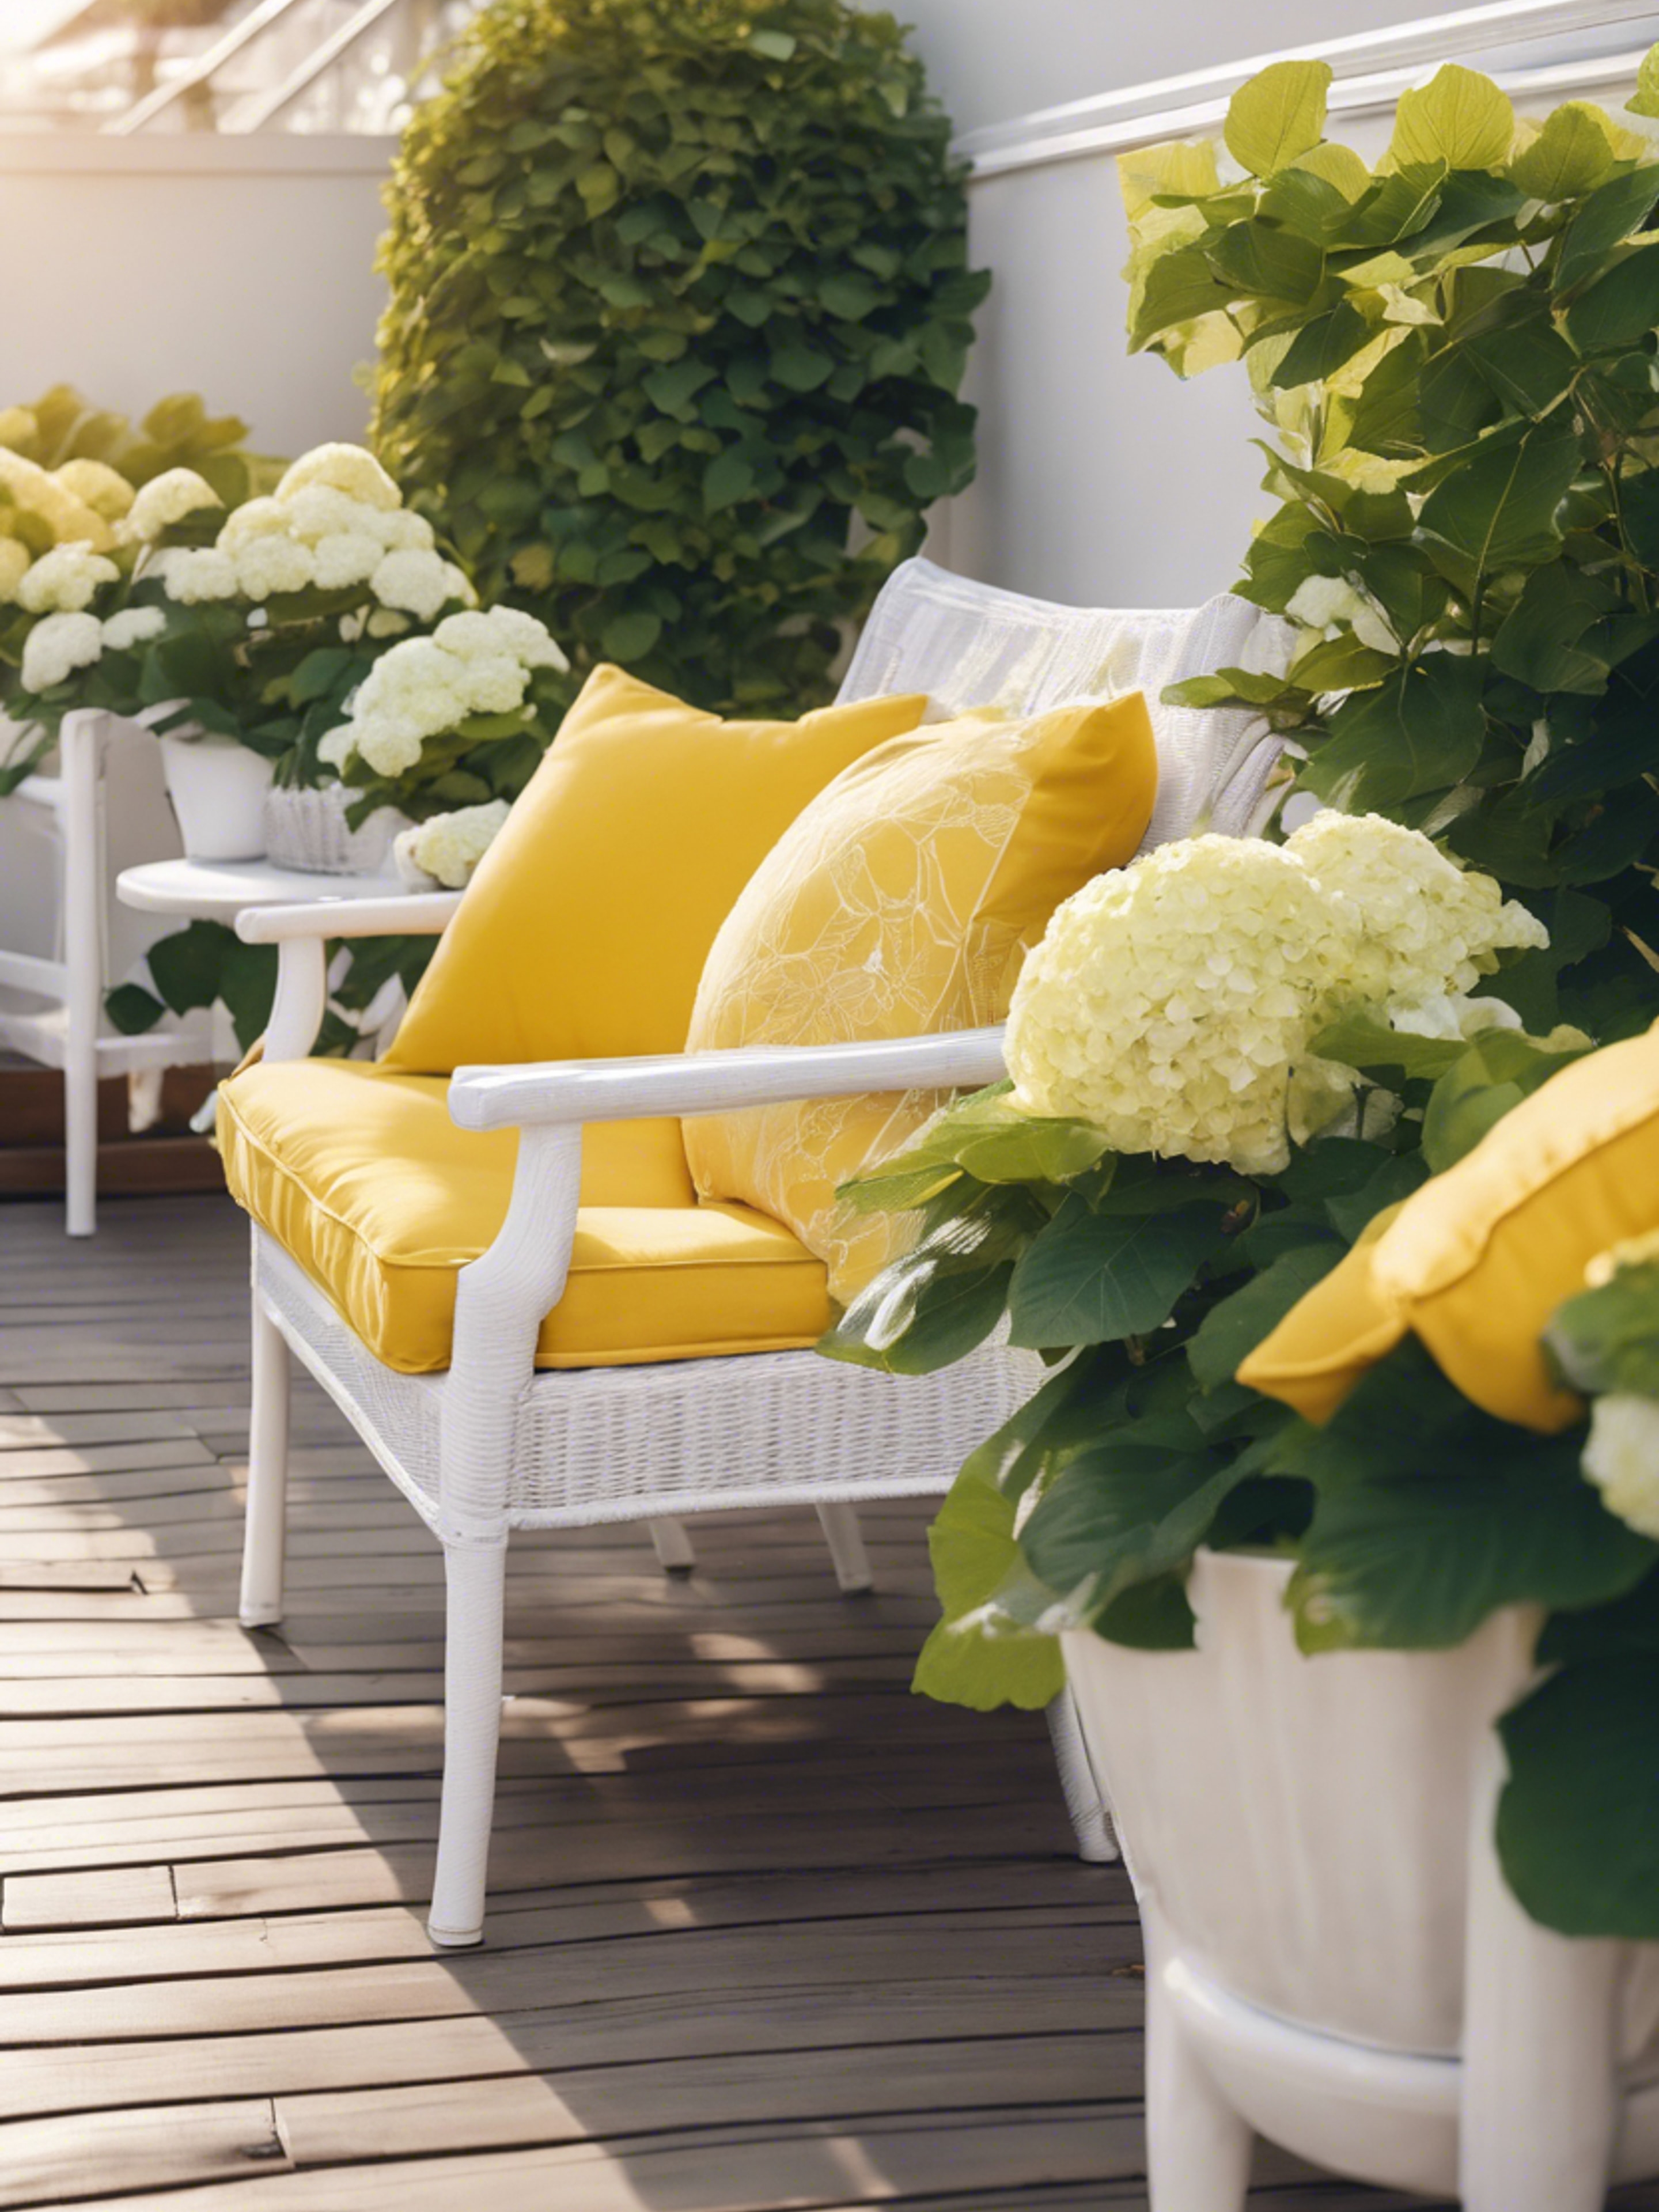 A preppy style terrace decked with bushes of hydrangeas, sunny yellow cushions, and white patio chairs set for a summer evening. Wallpaper[fe7817ef676444d99641]